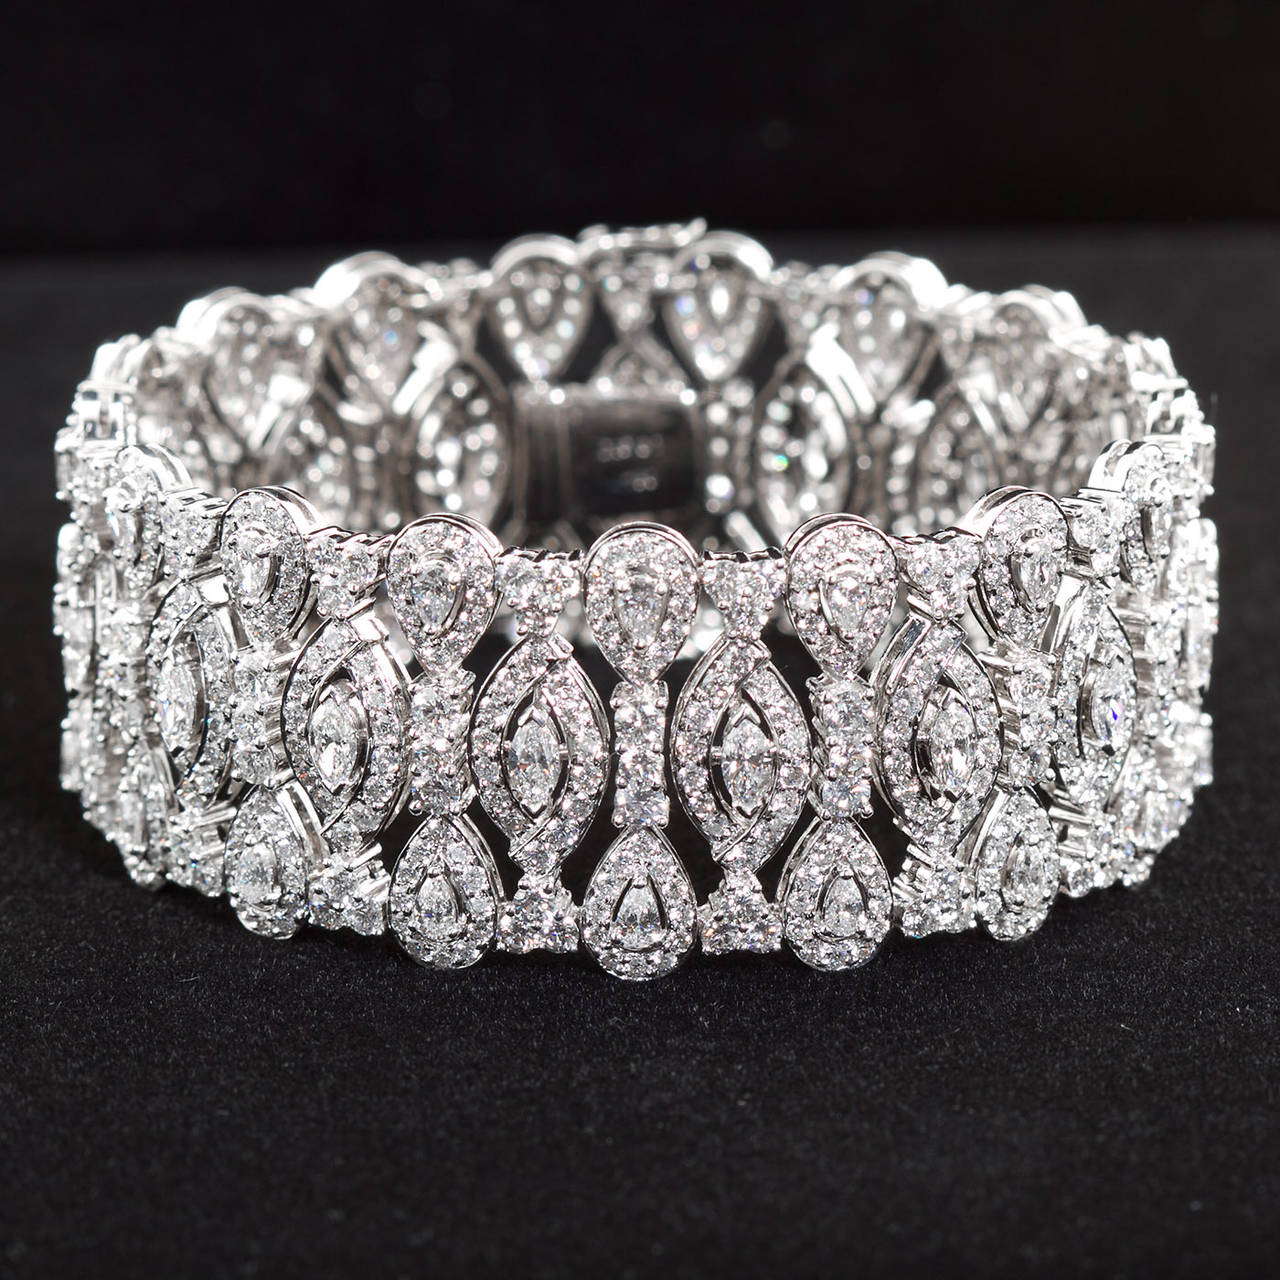 A very fine diamond in 18k white gold wide bracelet with marquise and pear shape and round brilliant diamonds of approximately 20 carats total weight.

Dealer ref No. 6388